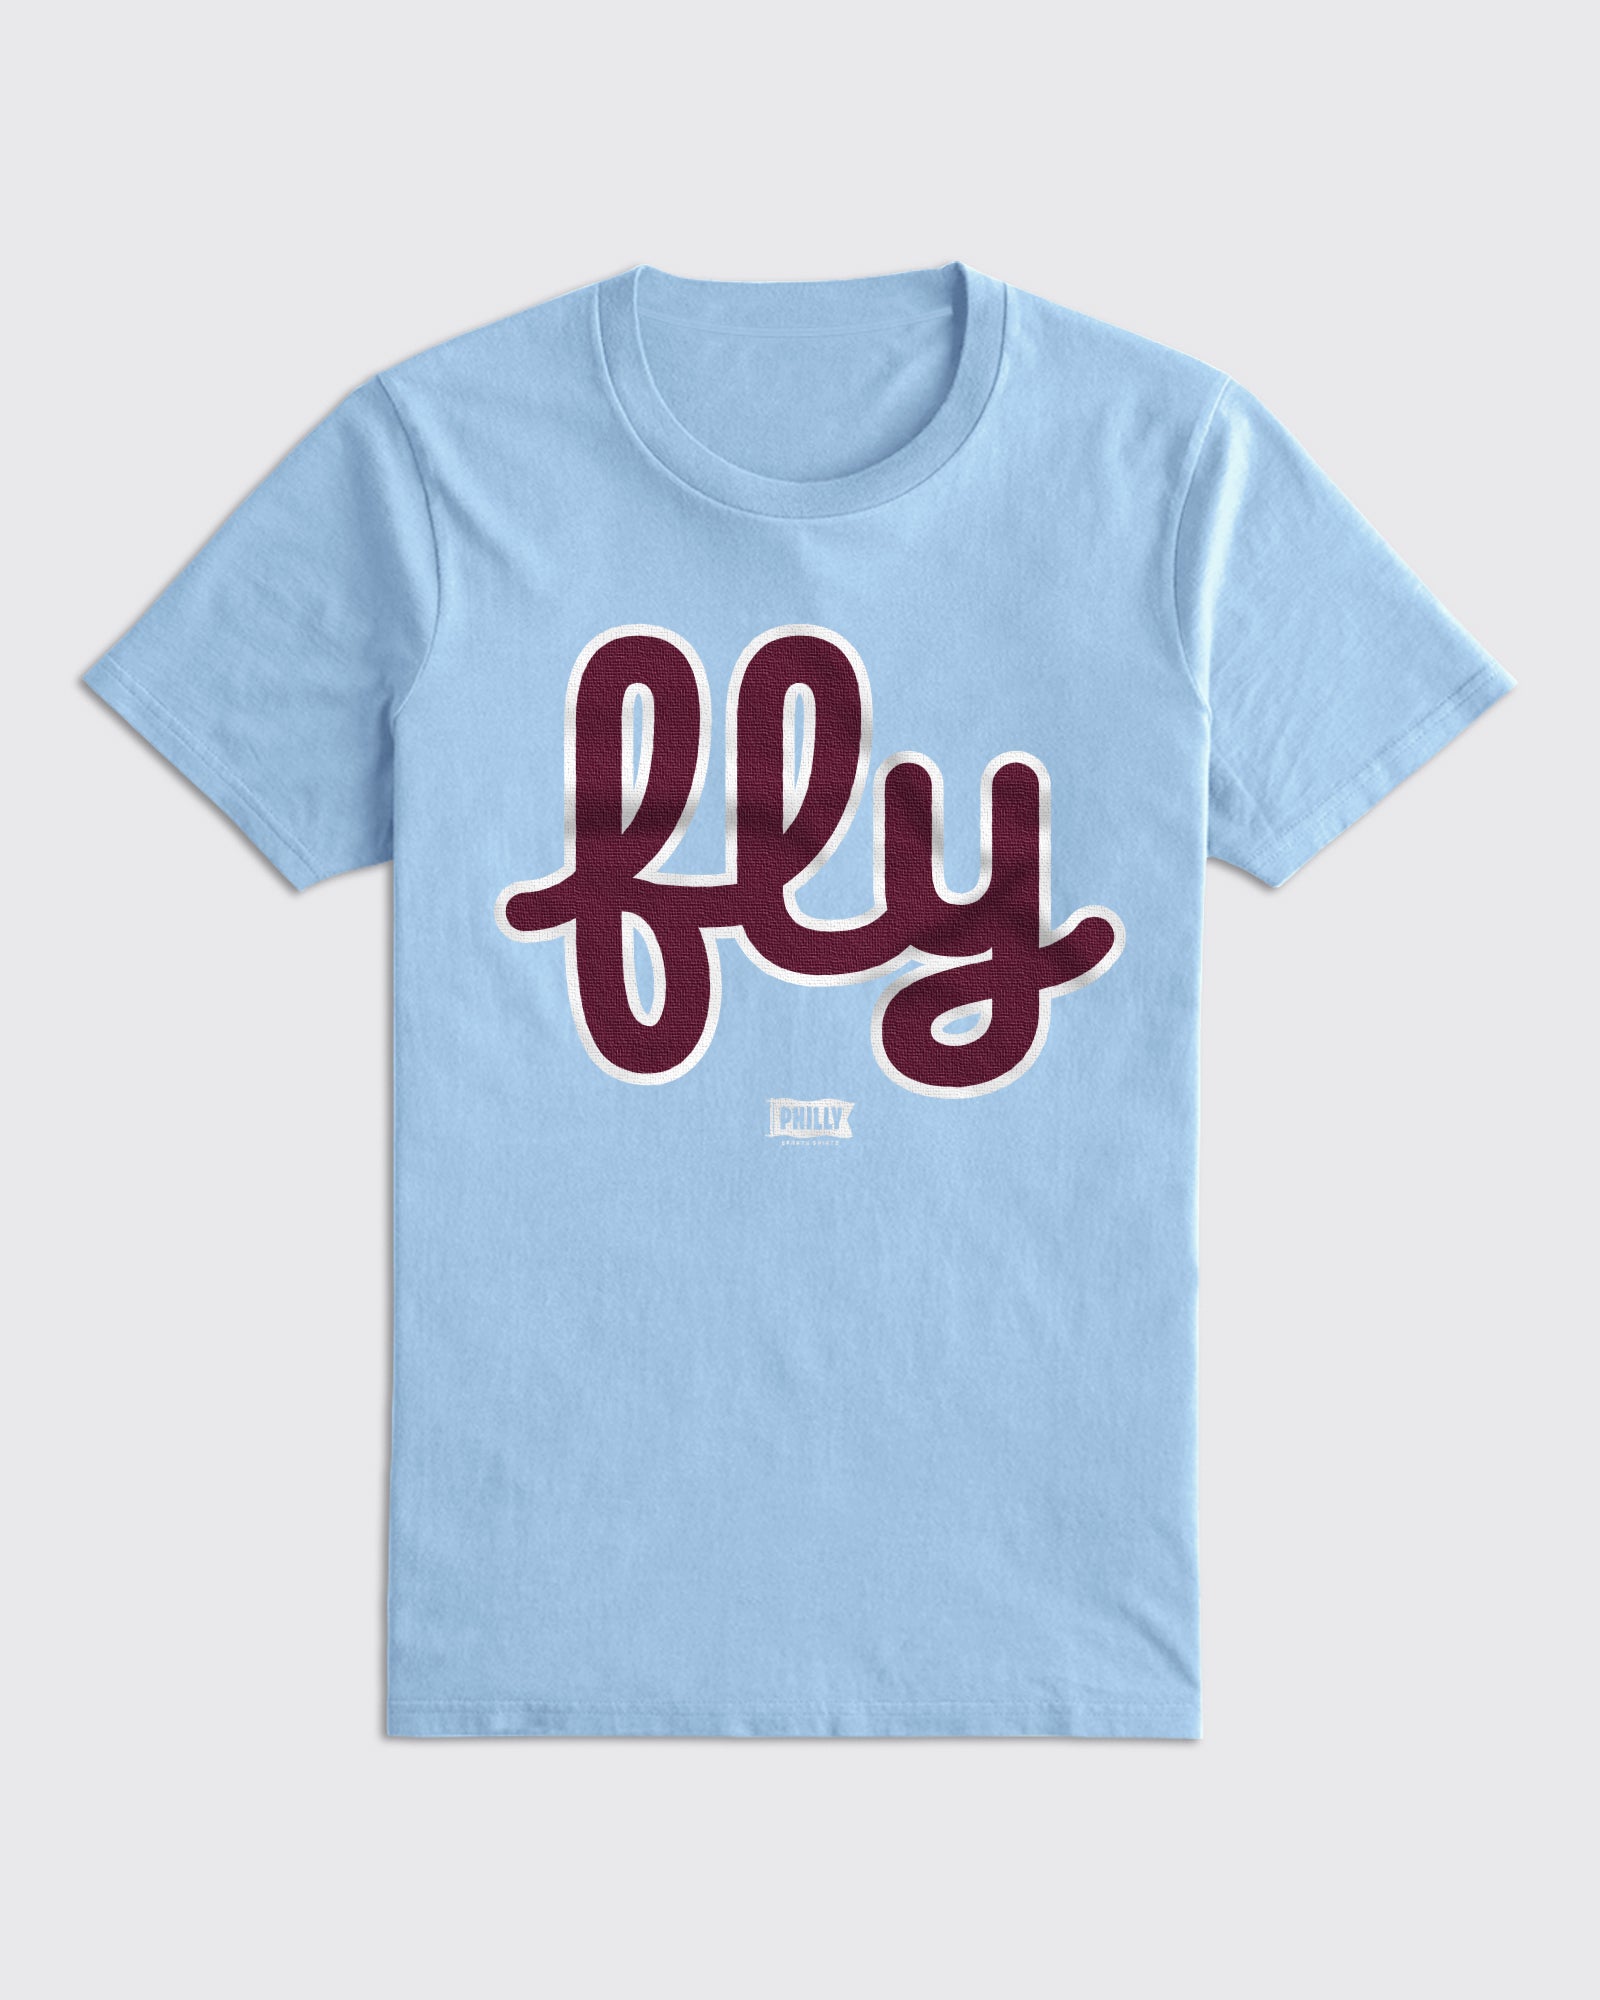 Phillies Fly Shirt - Phillies, T-Shirts - Philly Sports Shirts